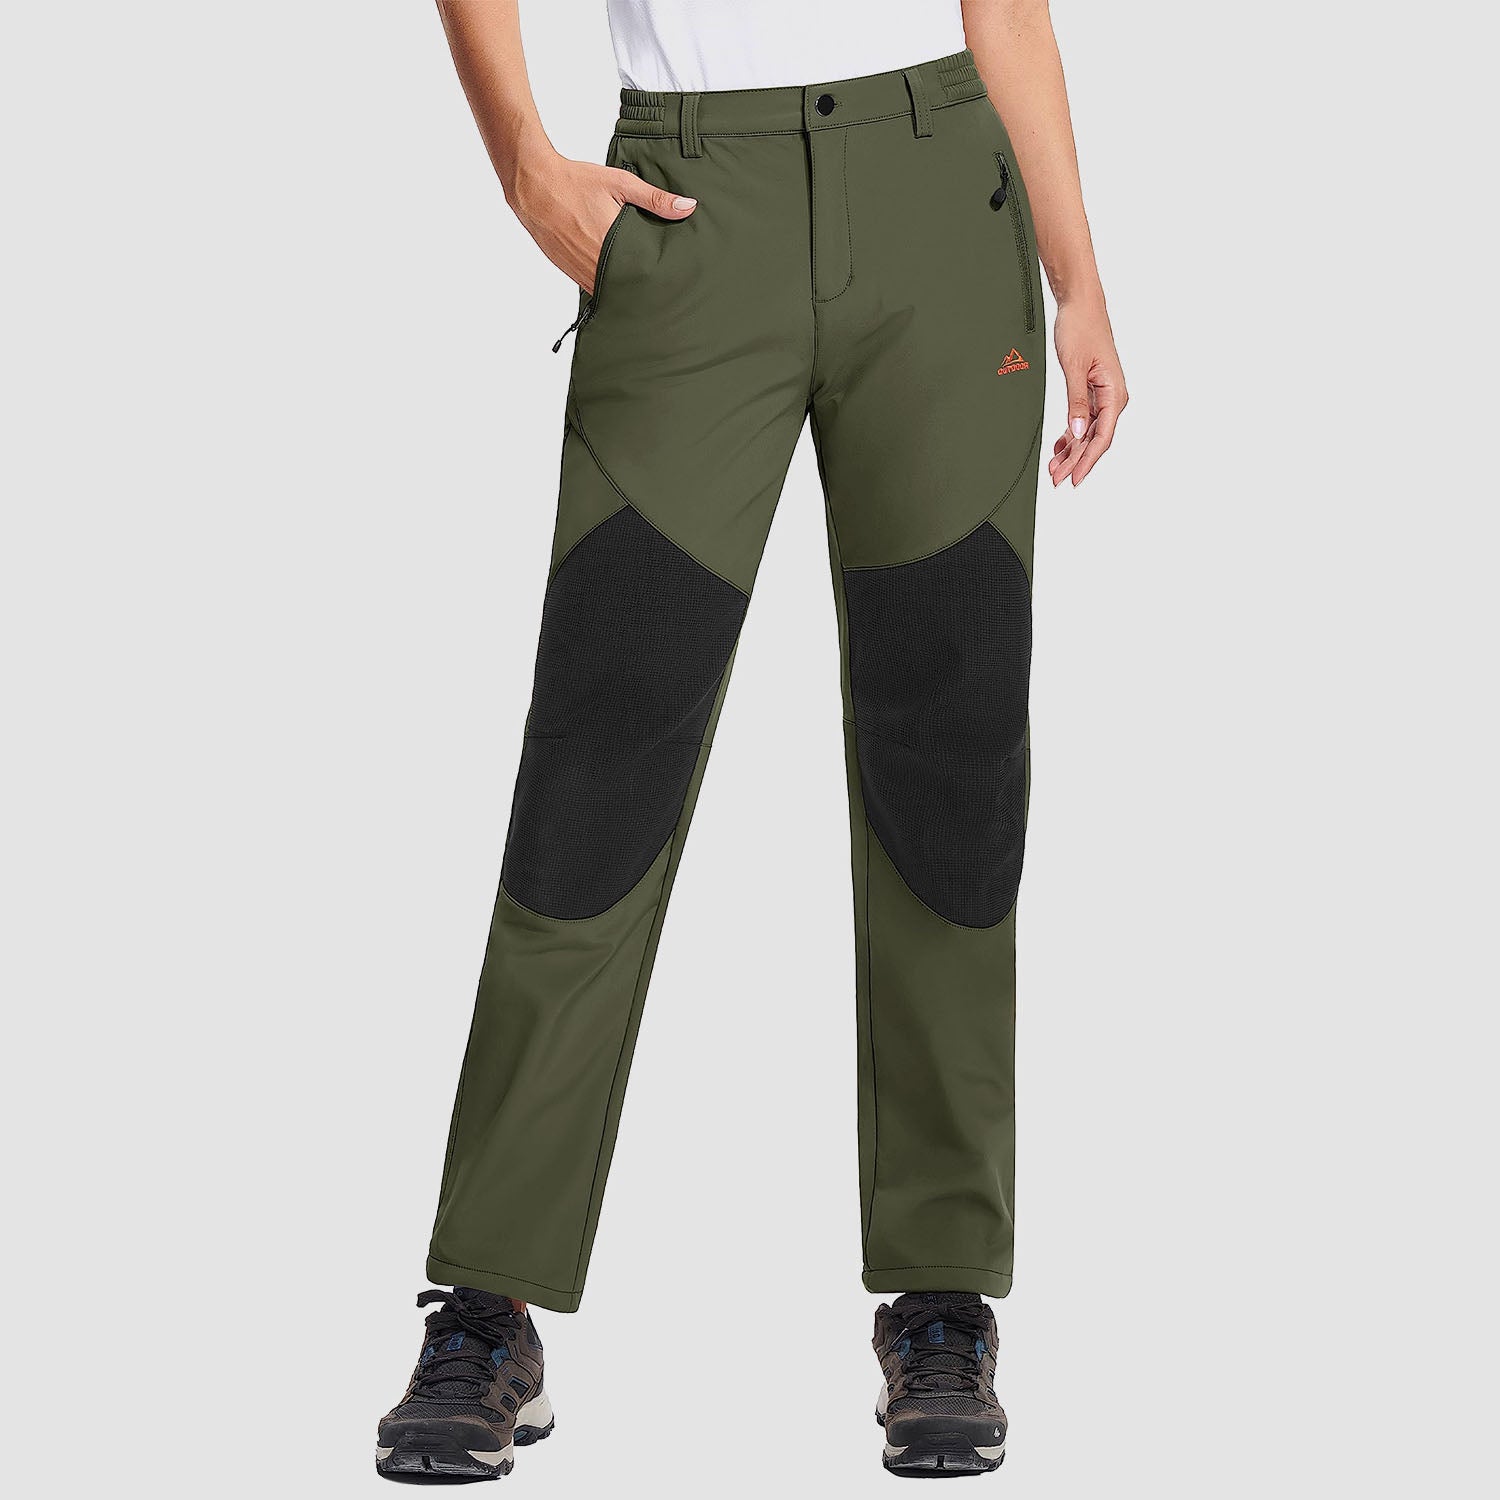  MAGCOMSEN Women's Fleece Lined Waterproof Insulated Softshell Pants  Outdoor Snow Ski Pants Winter Warm Hiking Pants Army Green XS : Clothing,  Shoes & Jewelry